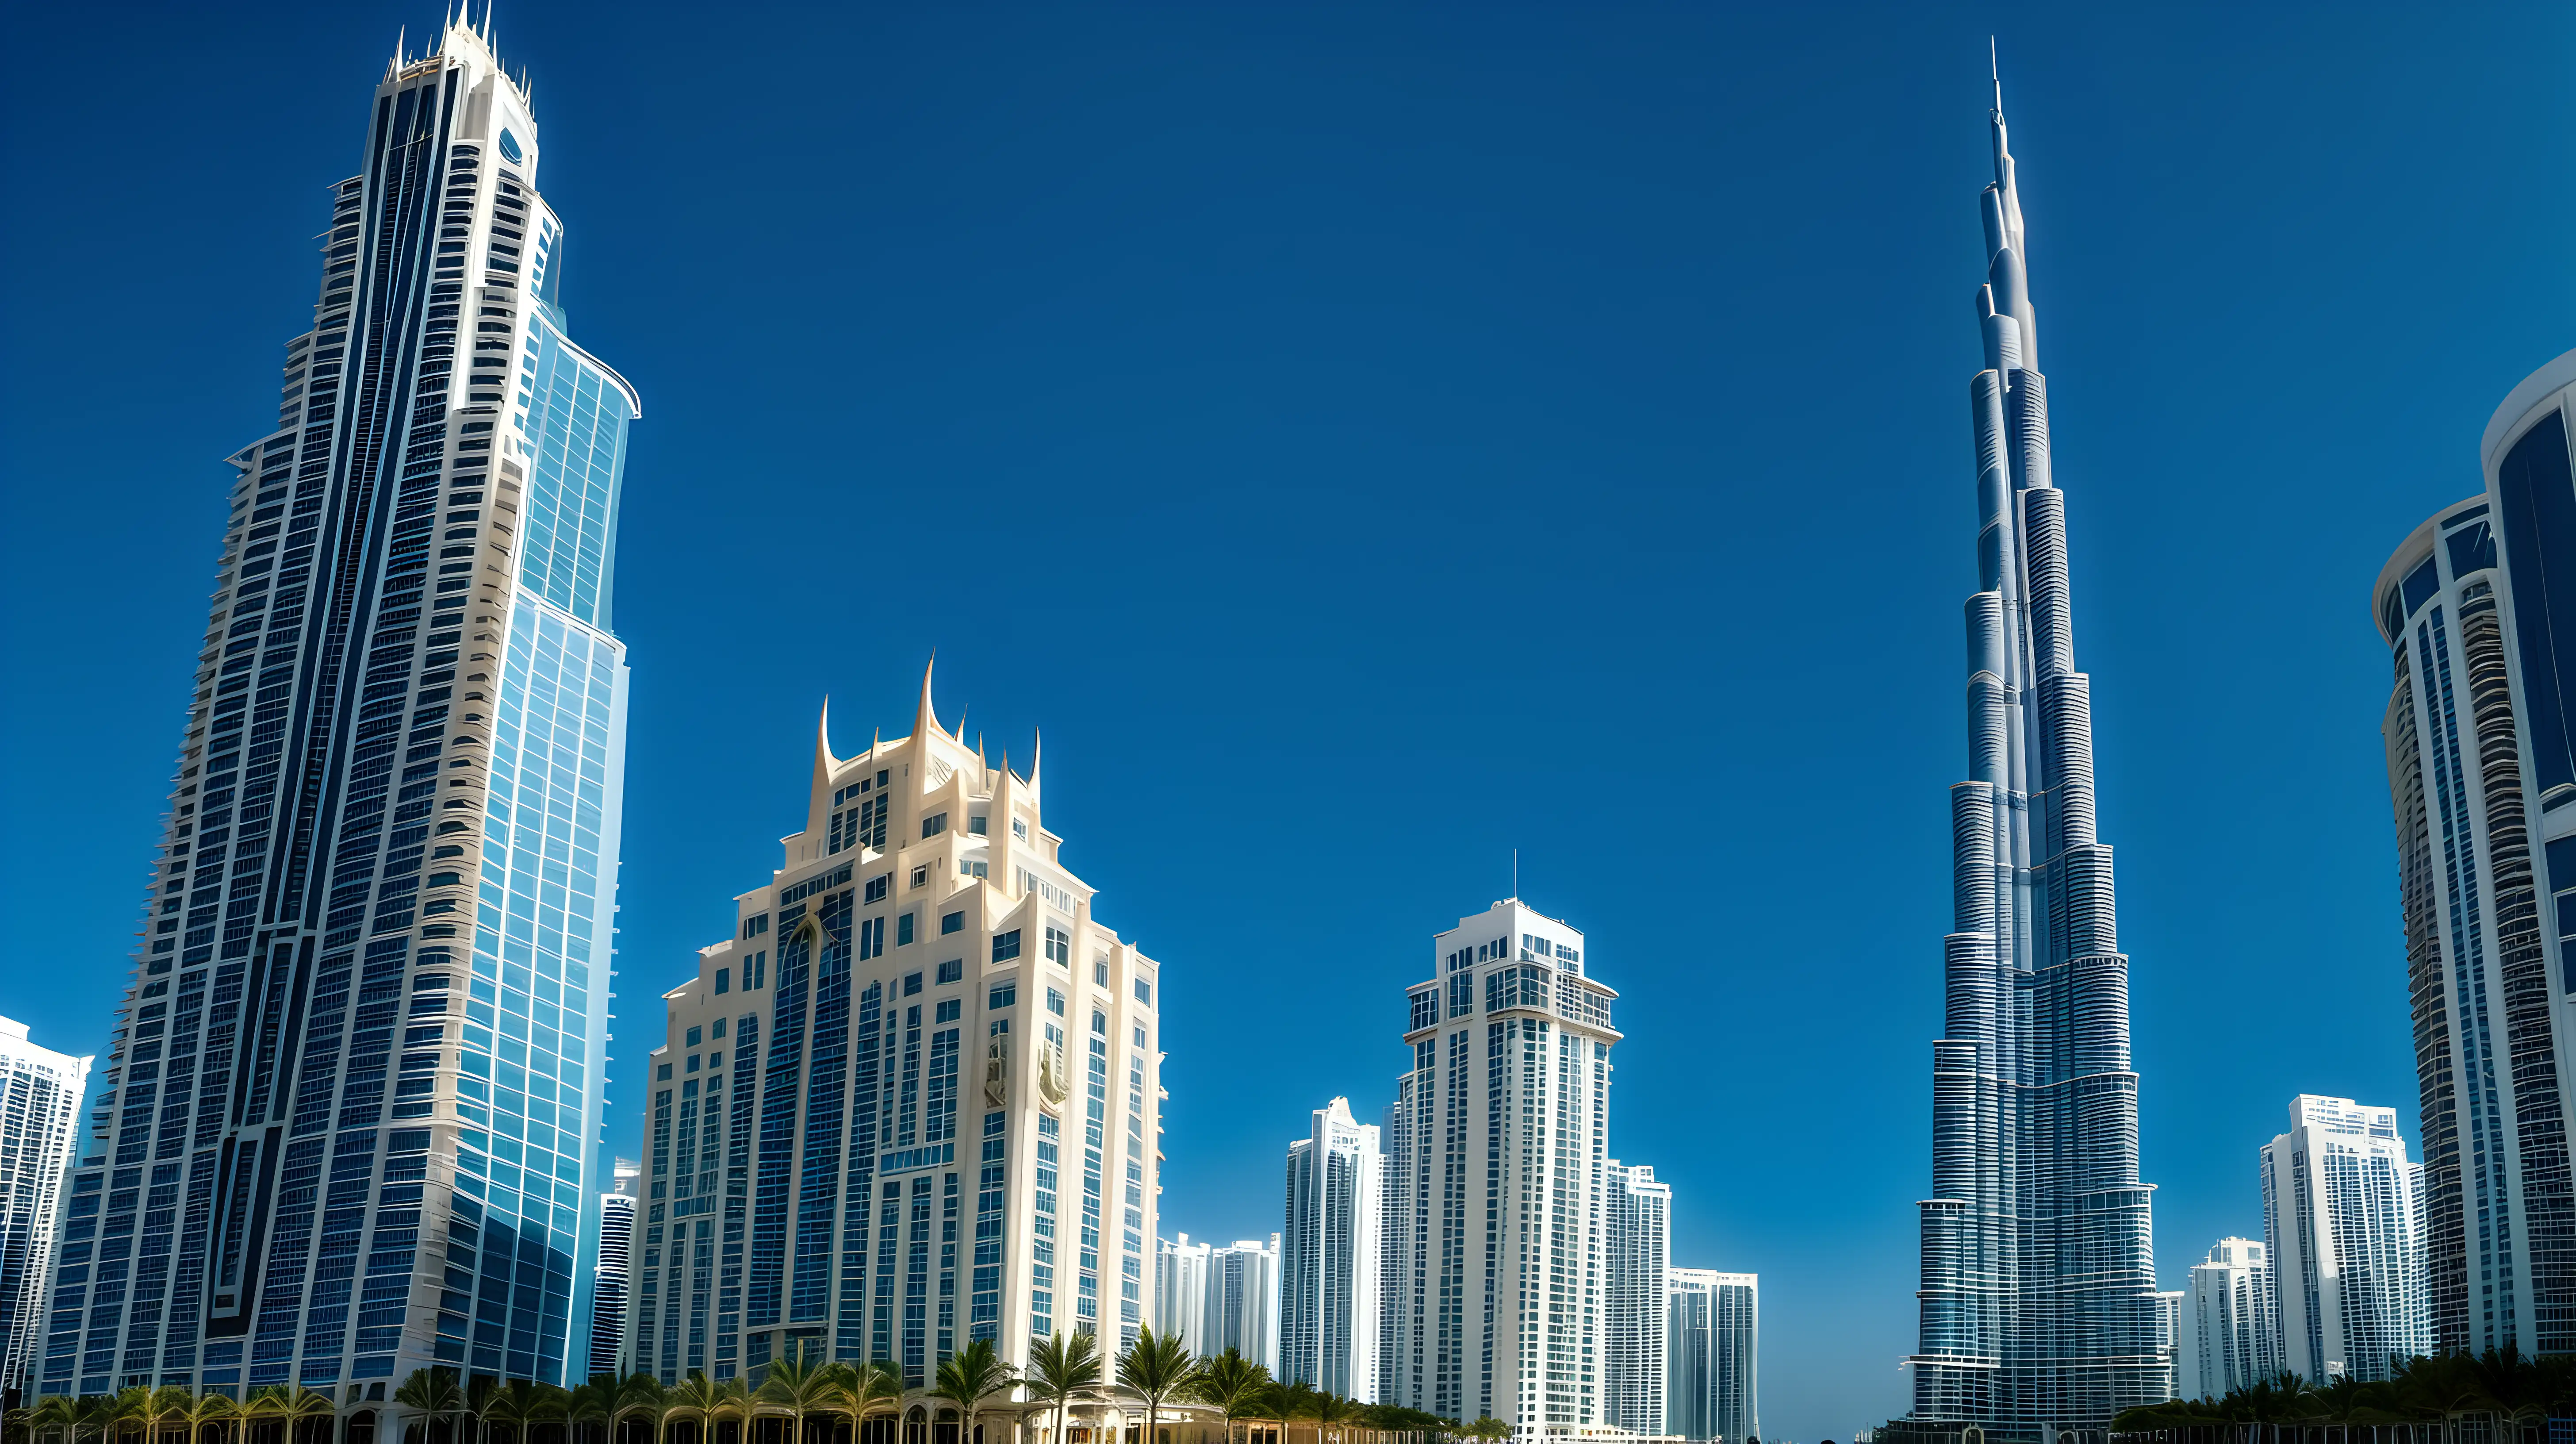 the Burj Khalif and the Miami Waldorf Astoria with a blue sky background